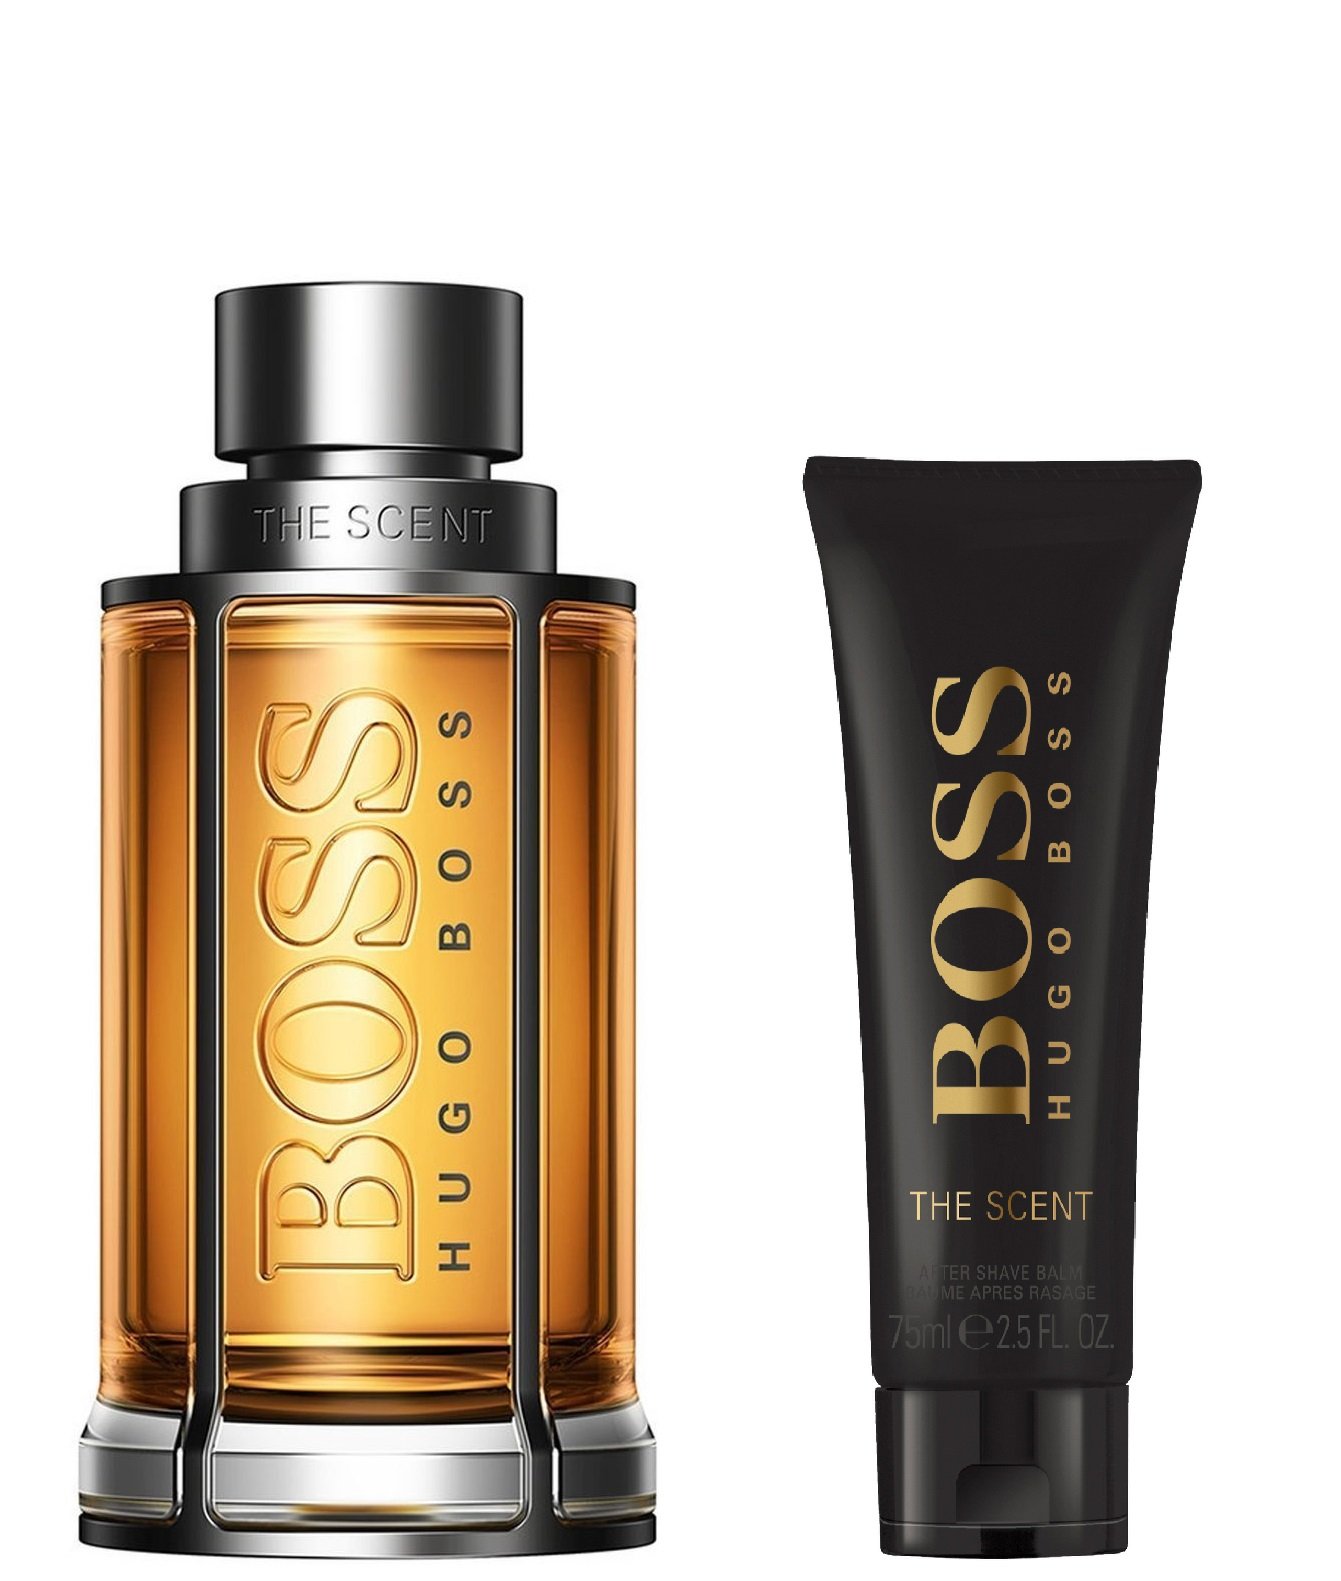 Buy Hugo Boss - The Scent - Edt 200 ml + After shave balm 75 ml - Giftbox